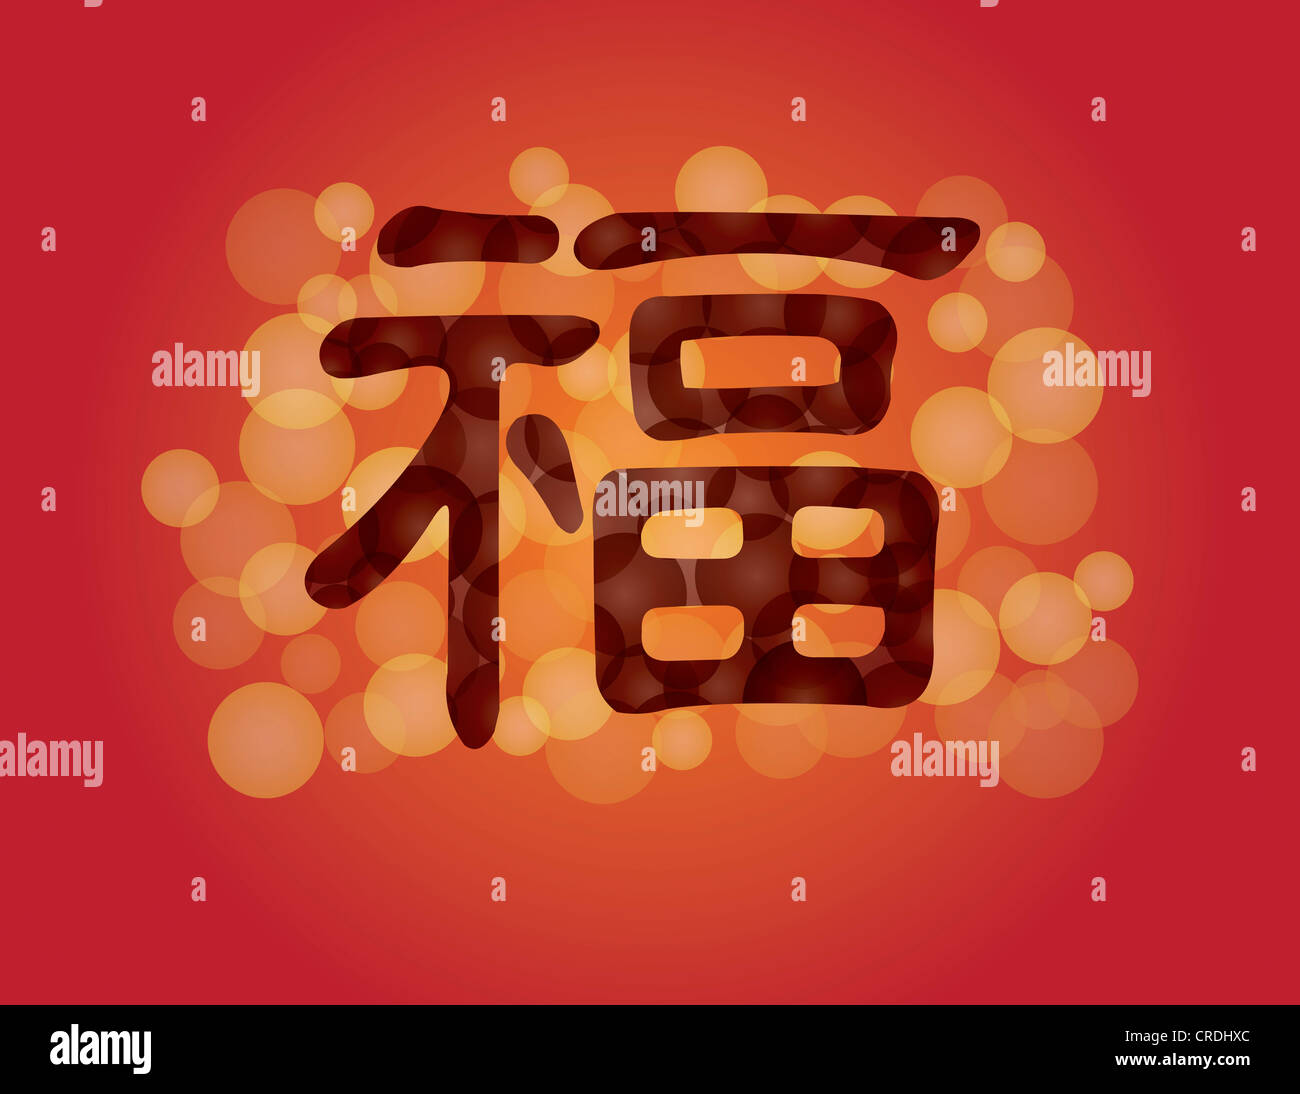 Chinese Good Fortune Text Symbol with Eternity Circle Pattern Illustration Stock Photo